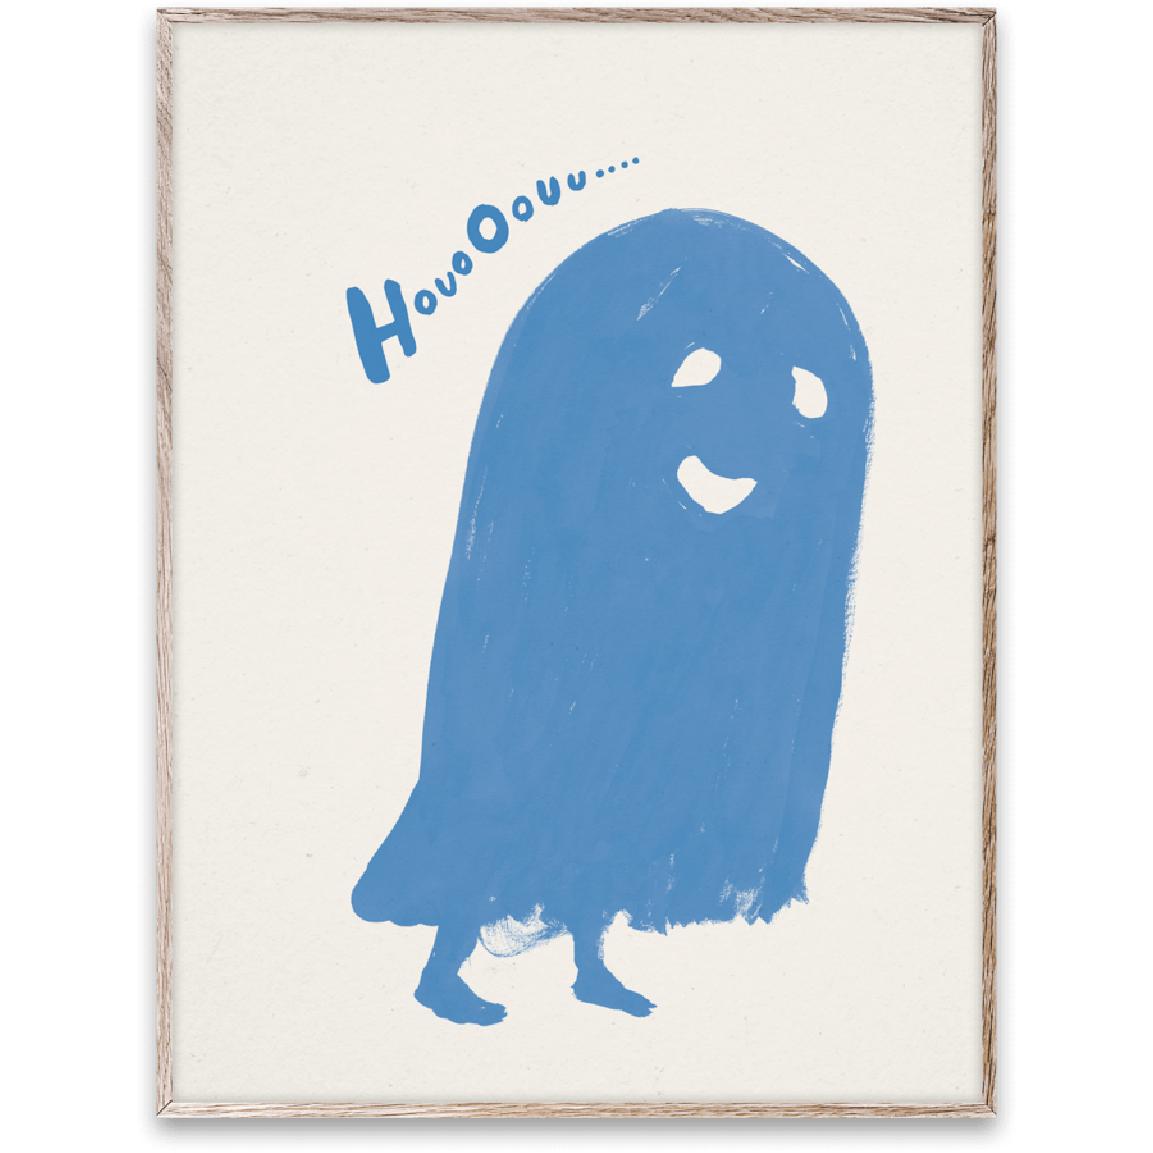 Paper Collective Houo Oouu Poster 30x40 Cm, Blue